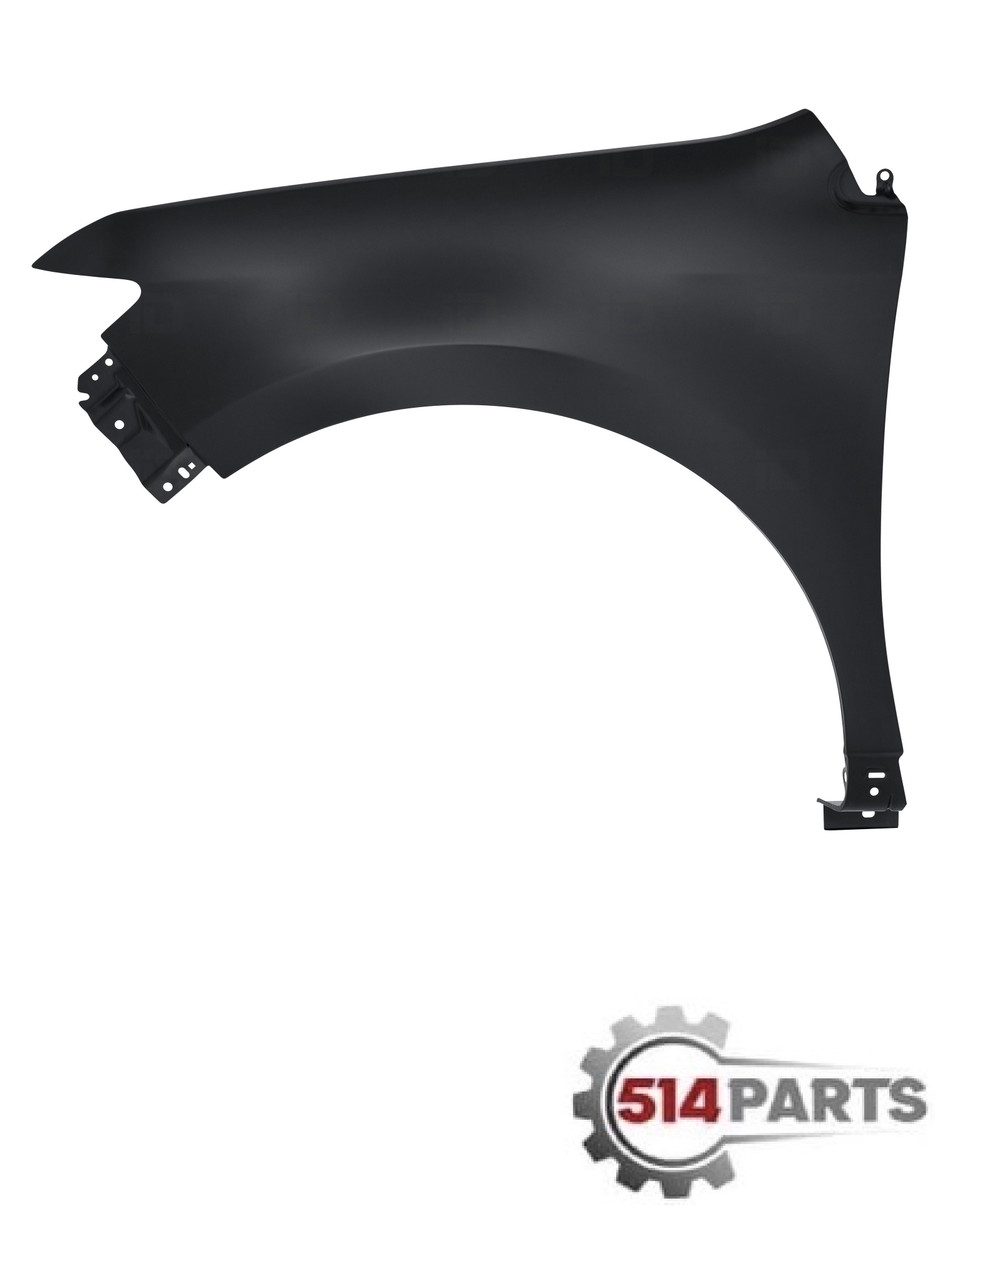 2007 - 2010 FORD EDGE FRONT FENDERS - AILES AVANT